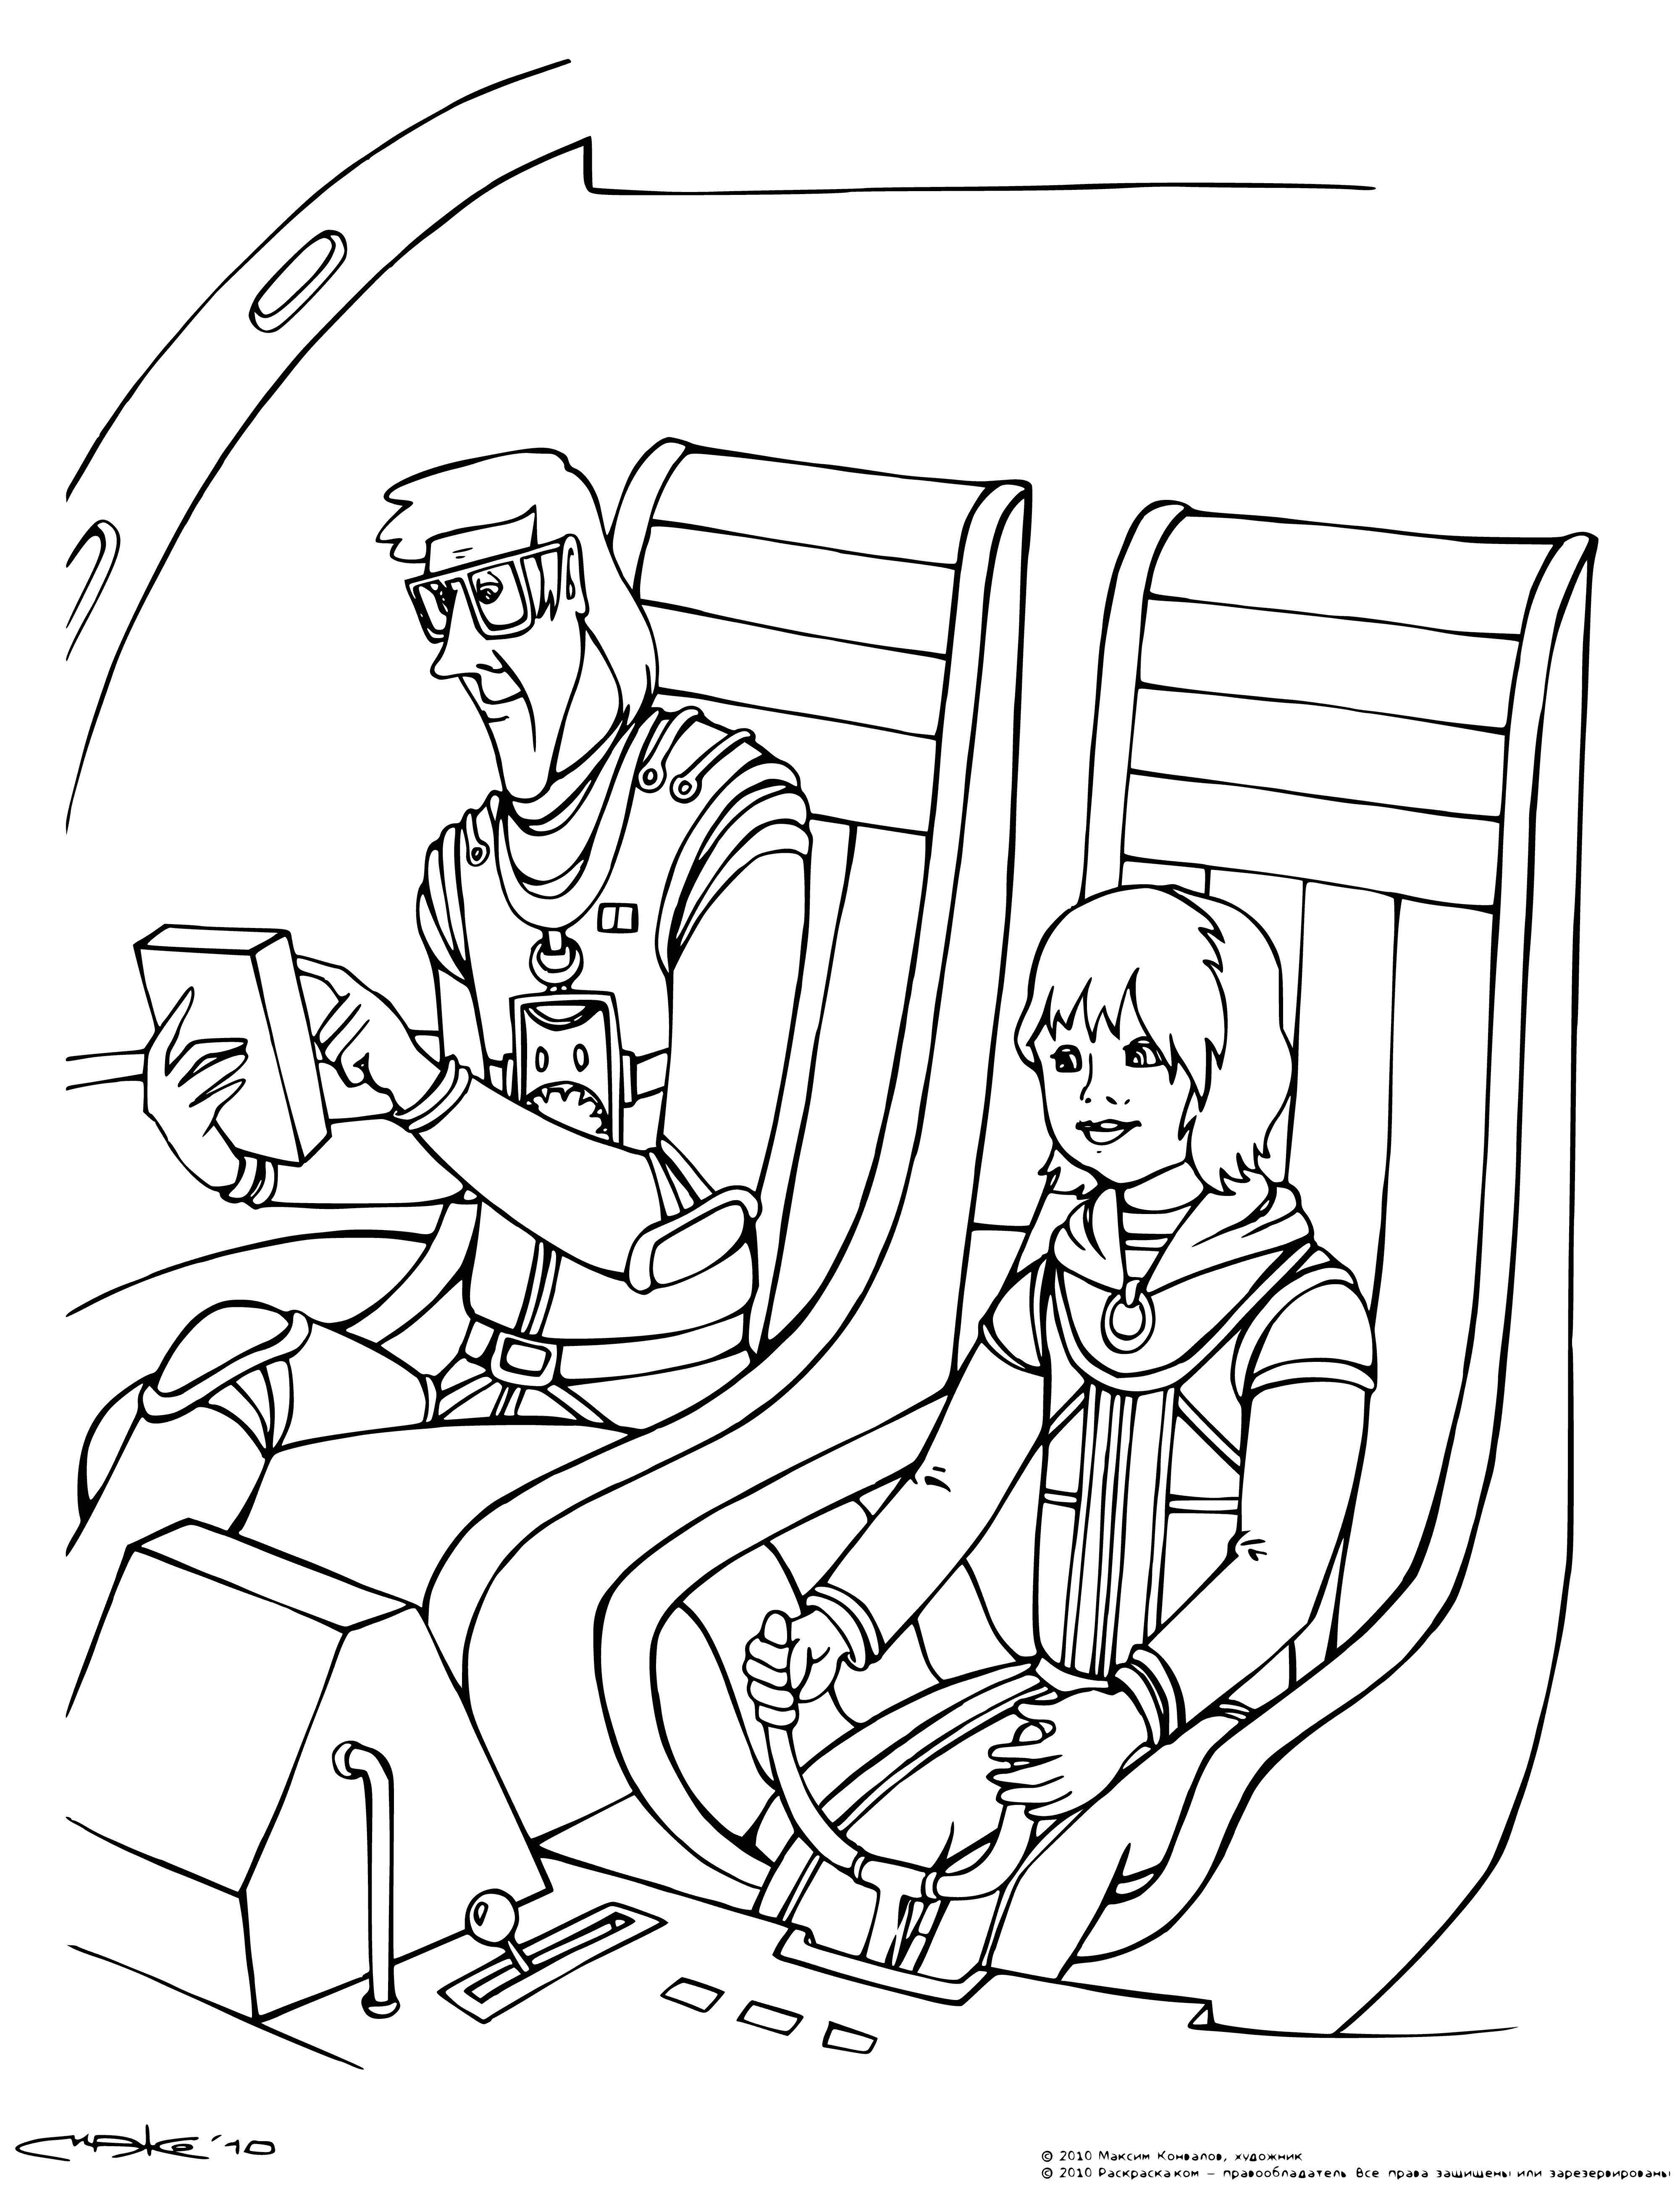 coloring page: Alice captains a large spaceship, wearing a spacesuit, looking at a large, red planet and two orbiting moons.